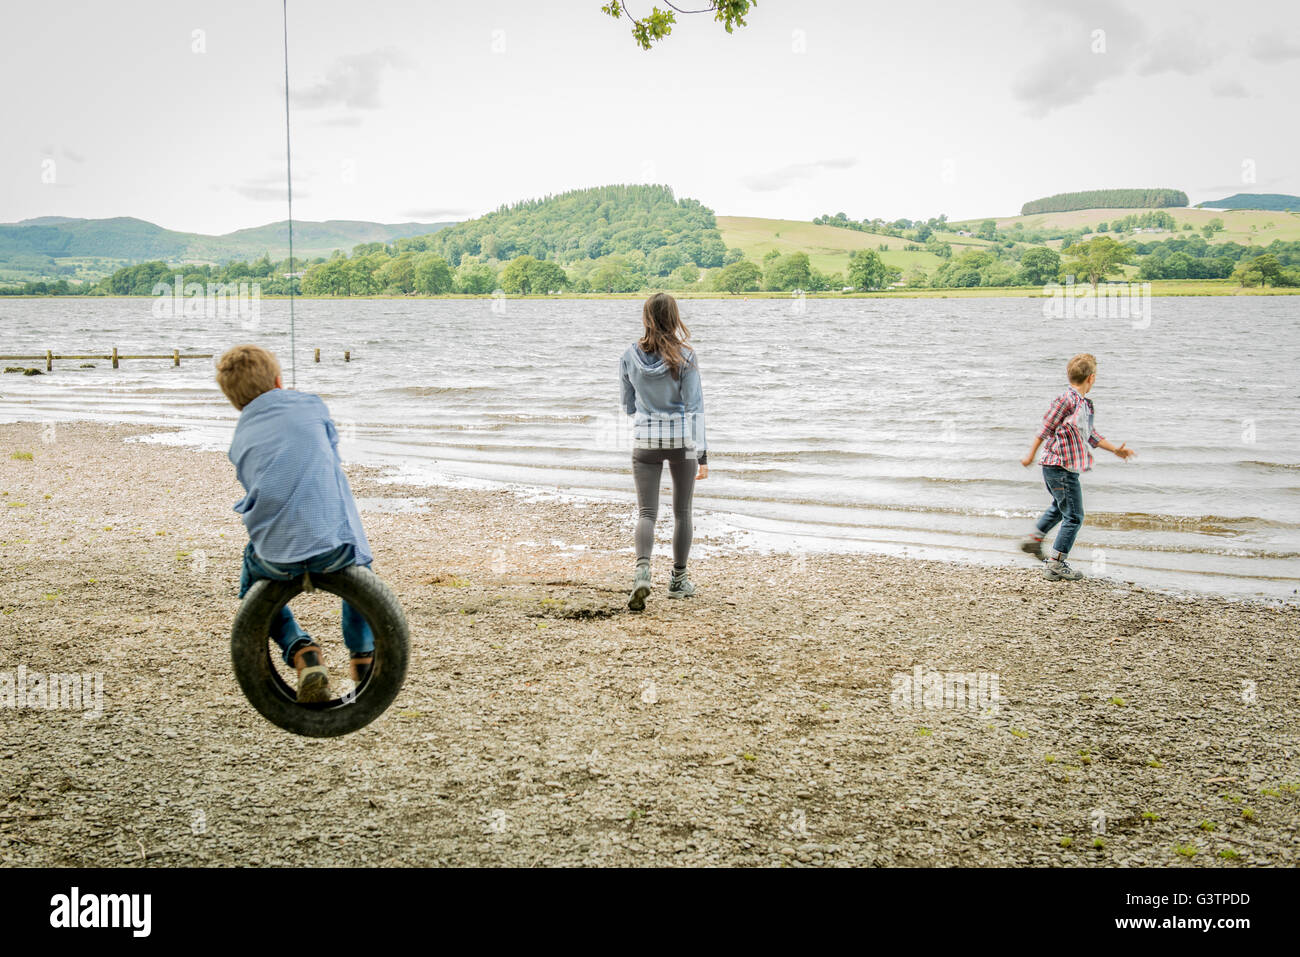 A girl and two boys playing on a tyre hanging from a tree on the shore beside Bala Lake in Wales. Stock Photo